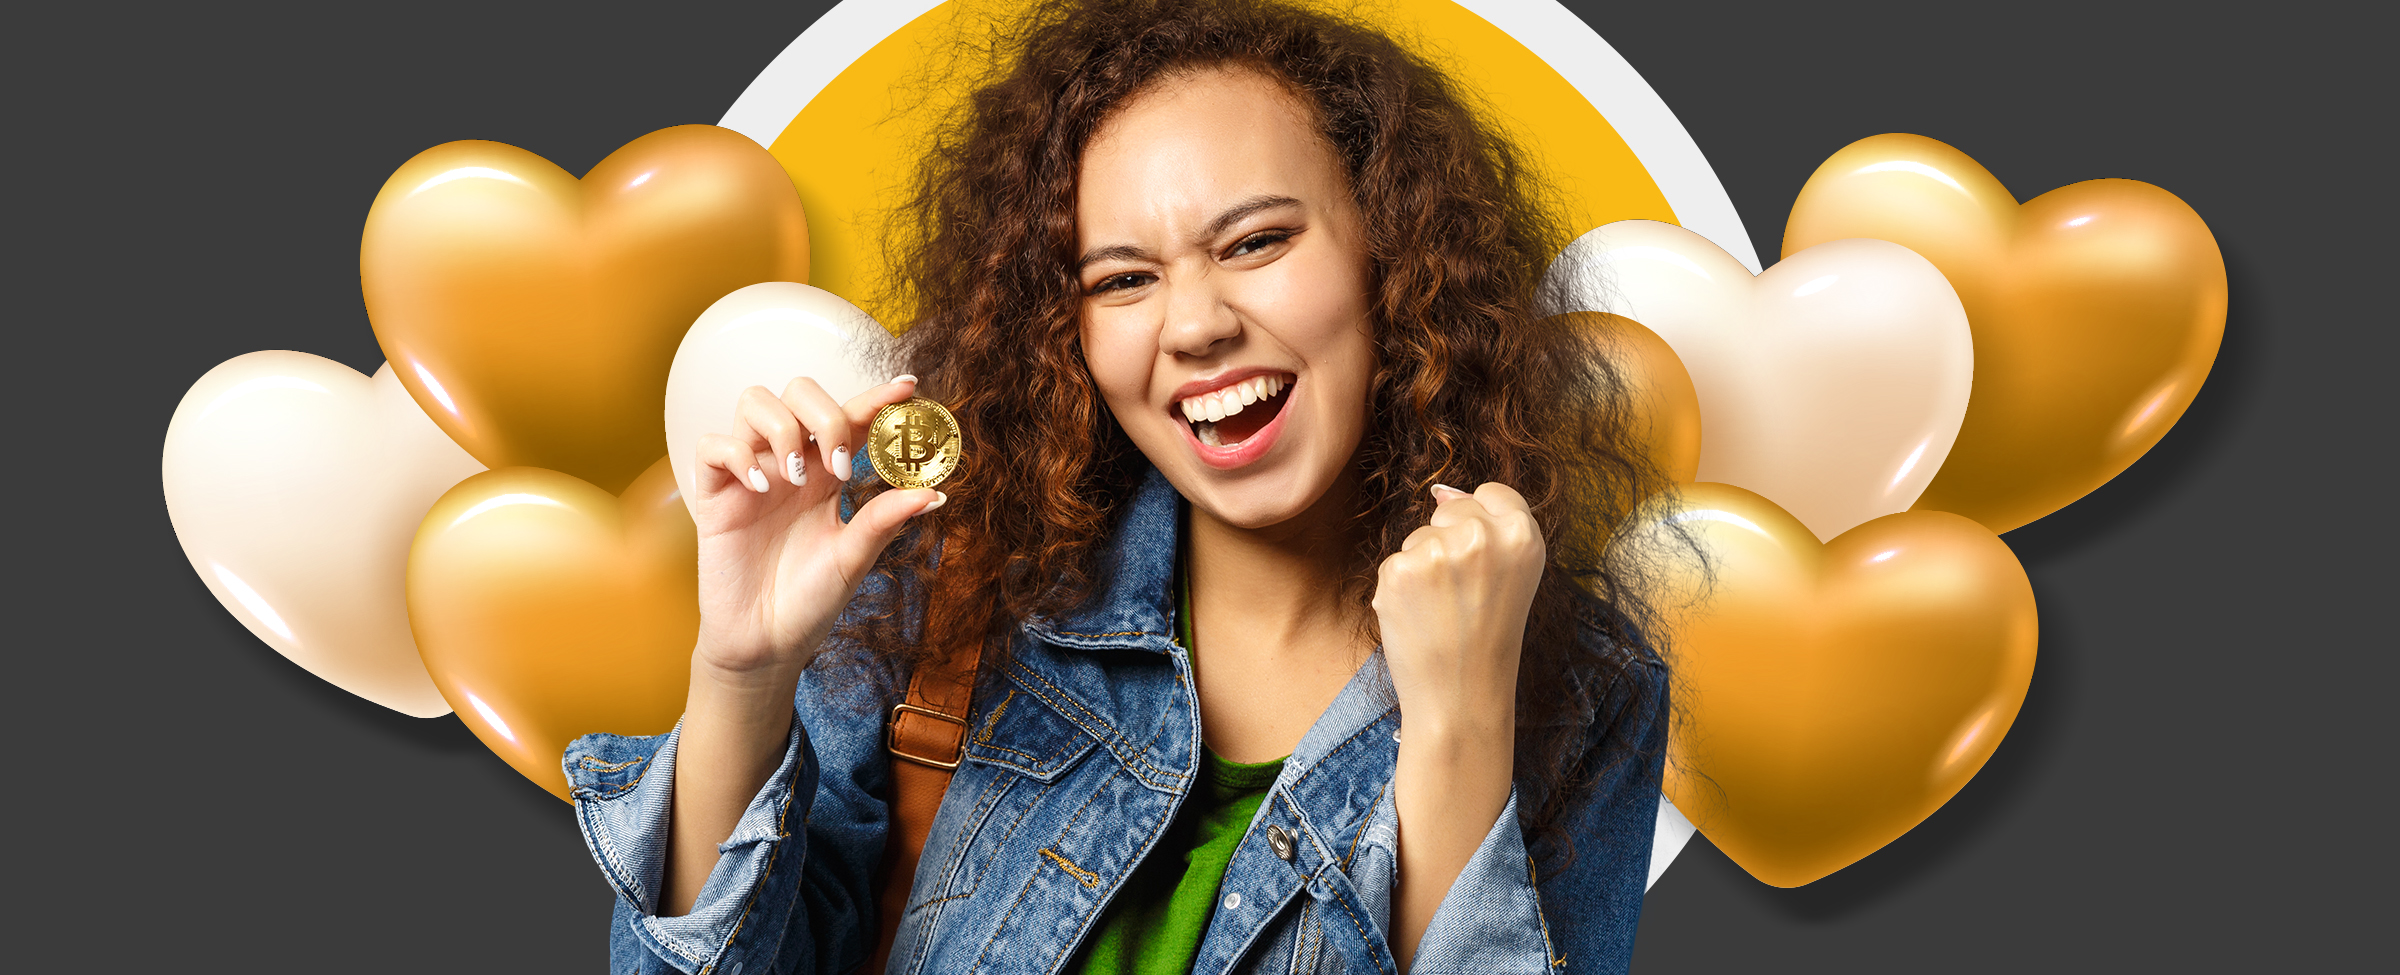 Jump on the crypto train, players and take it all the way to Point Pokies. Bitcoin is all about benefit, and that’s why it’s so popular with these gold star games at Joe’s.